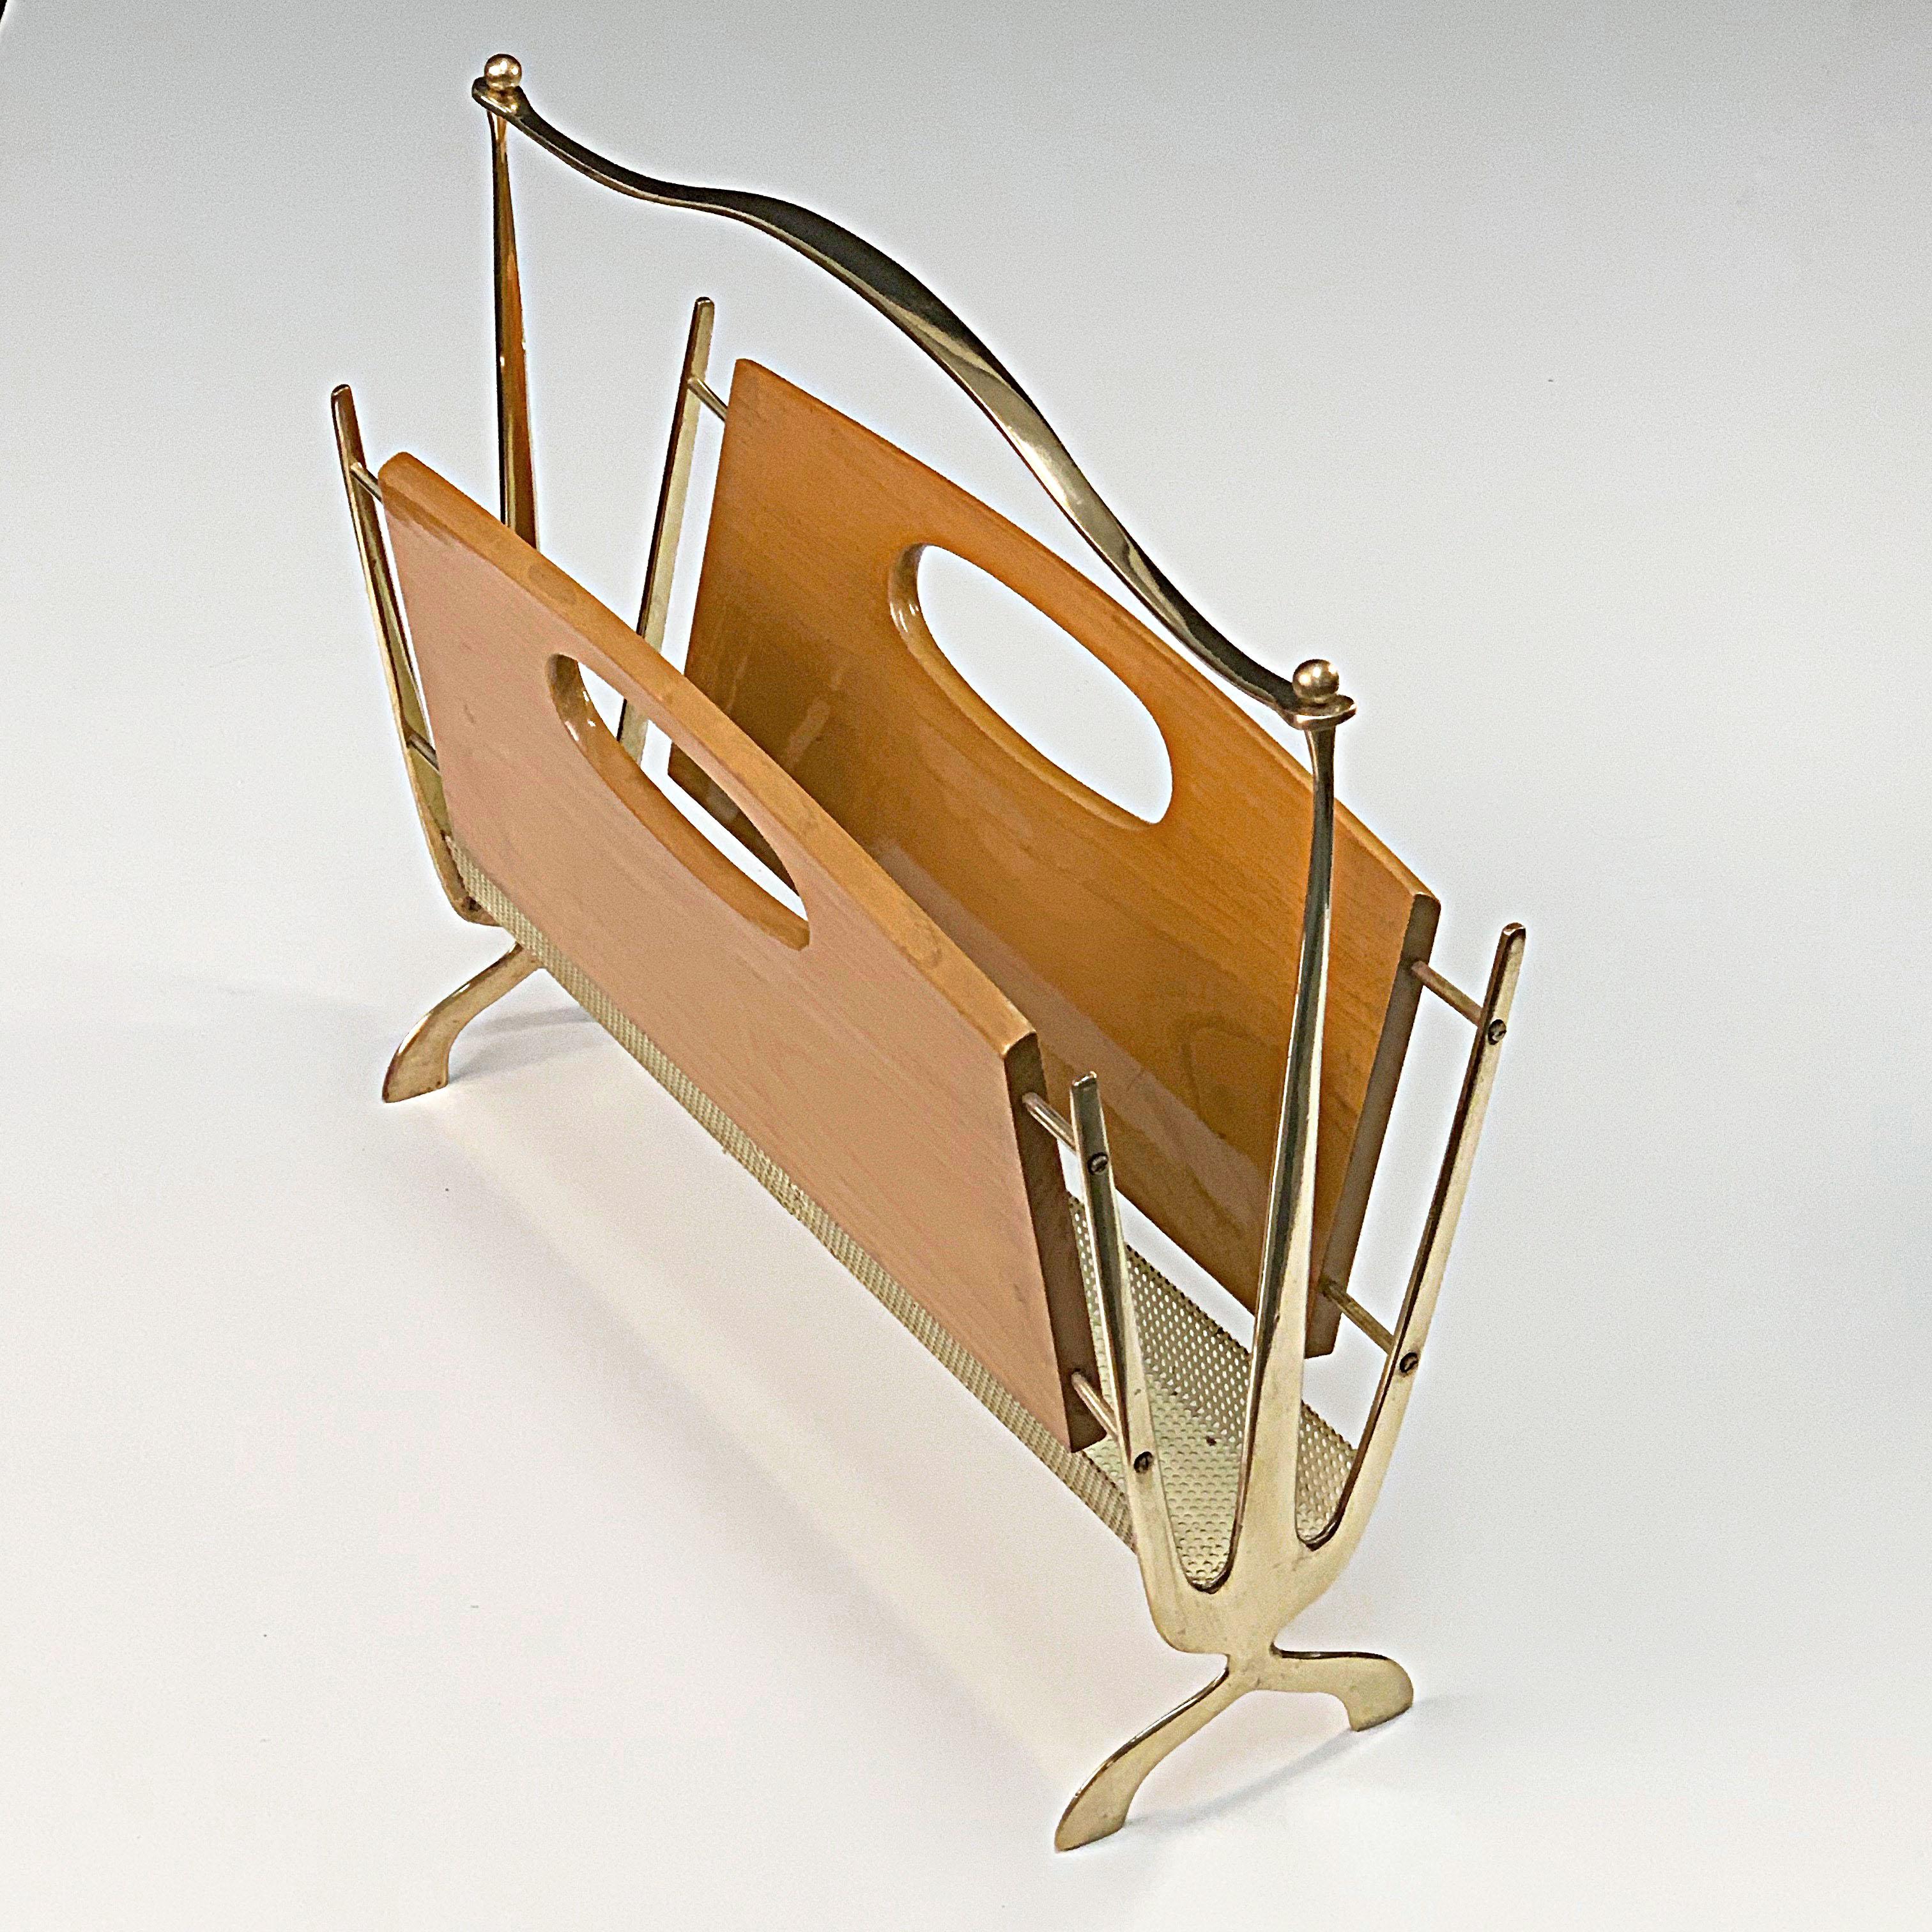 Maison Baguès Midcentury Brass and Chestnut Wood French Magazine Rack, 1950s For Sale 3